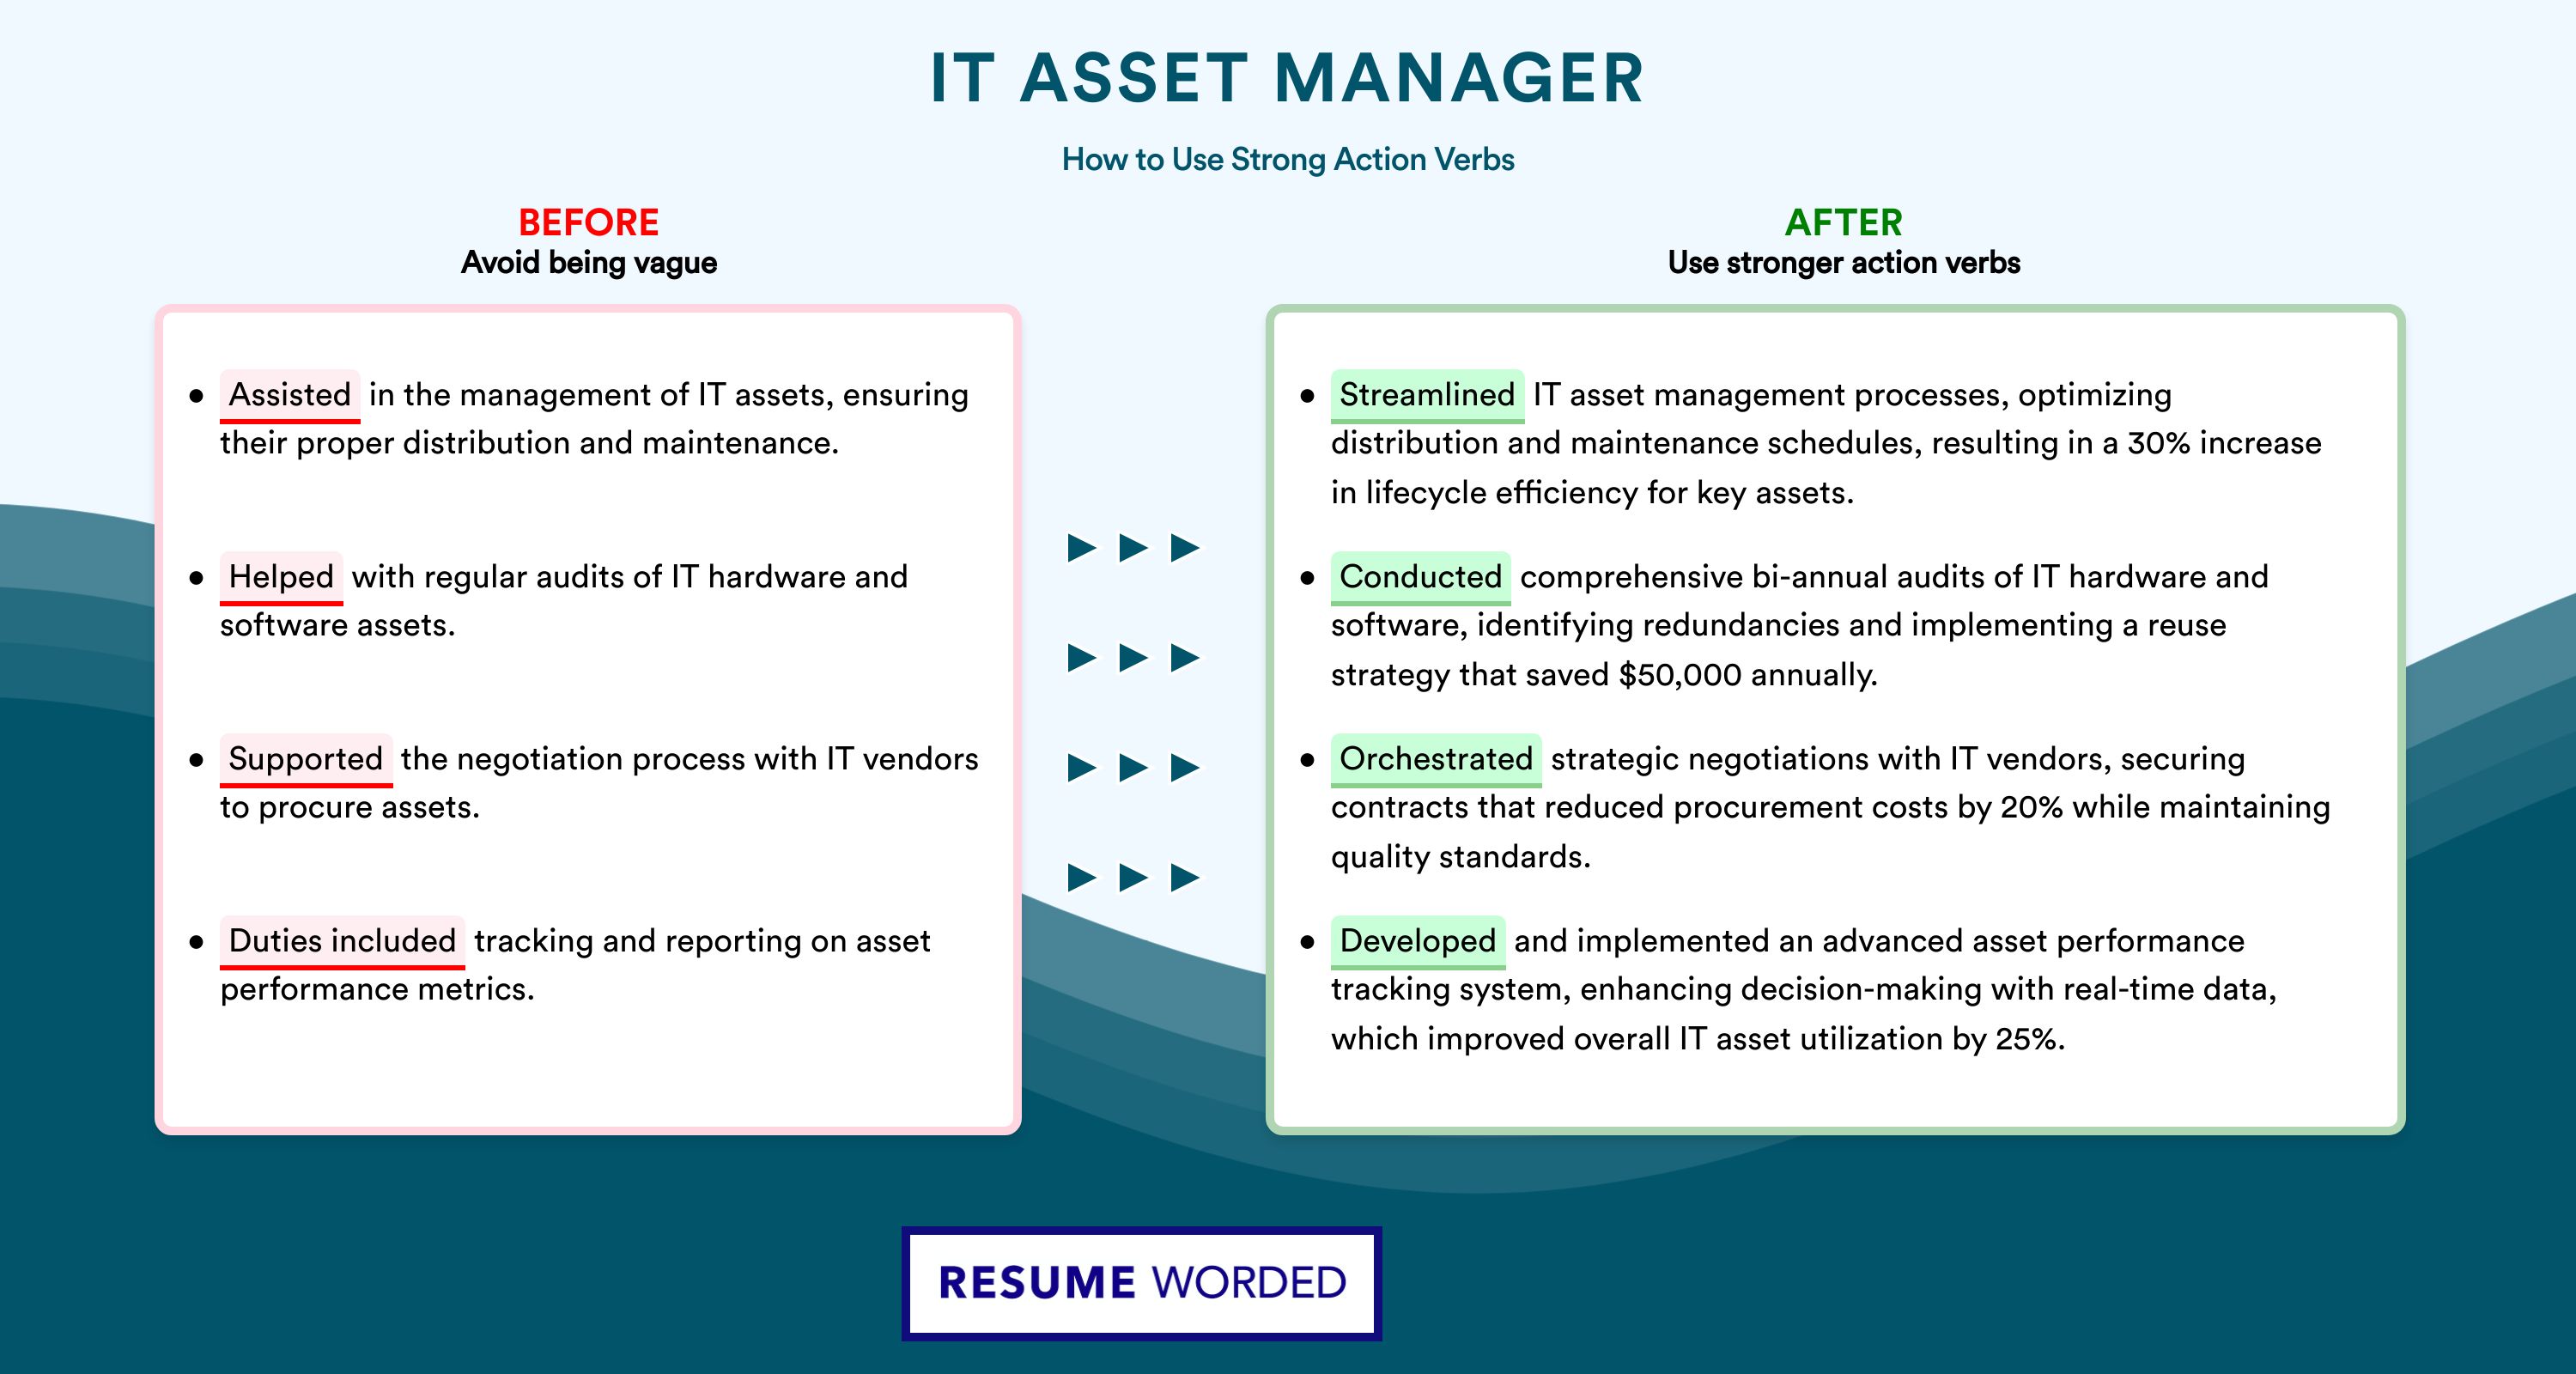 Action Verbs for IT Asset Manager